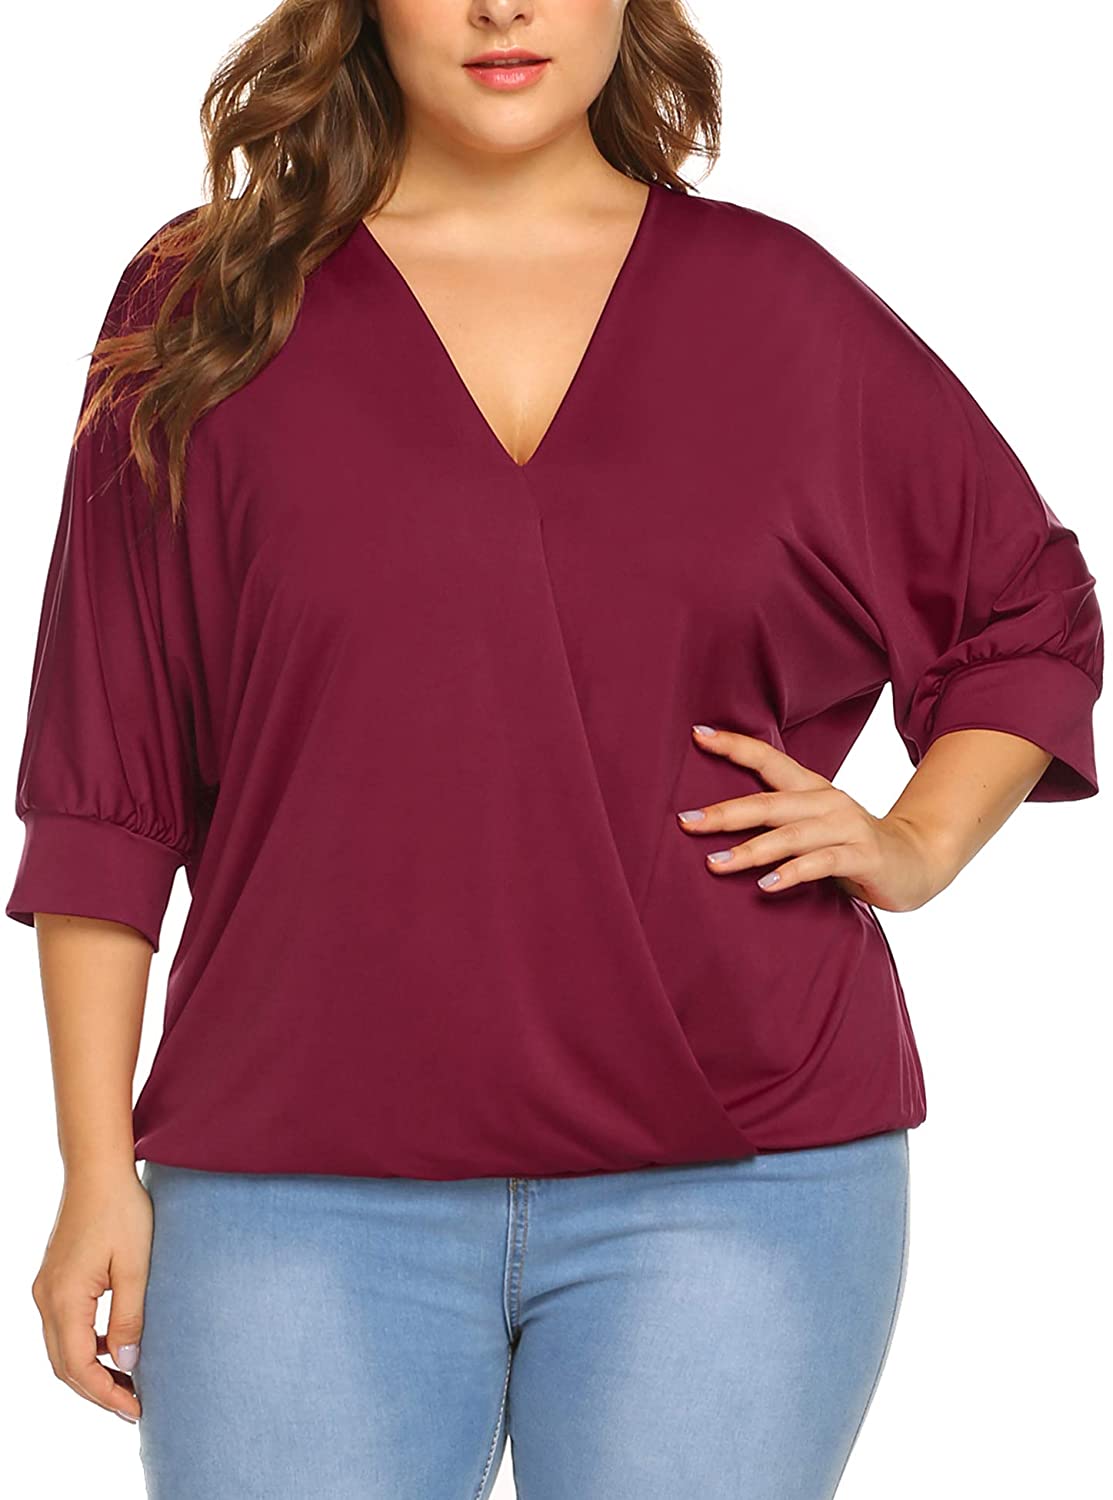 IN'VOLAND Womens Plus Size Tops V Neck Wrap Short Sleeve Shirts Casual Loose Dolman Top Tunic Blouses 